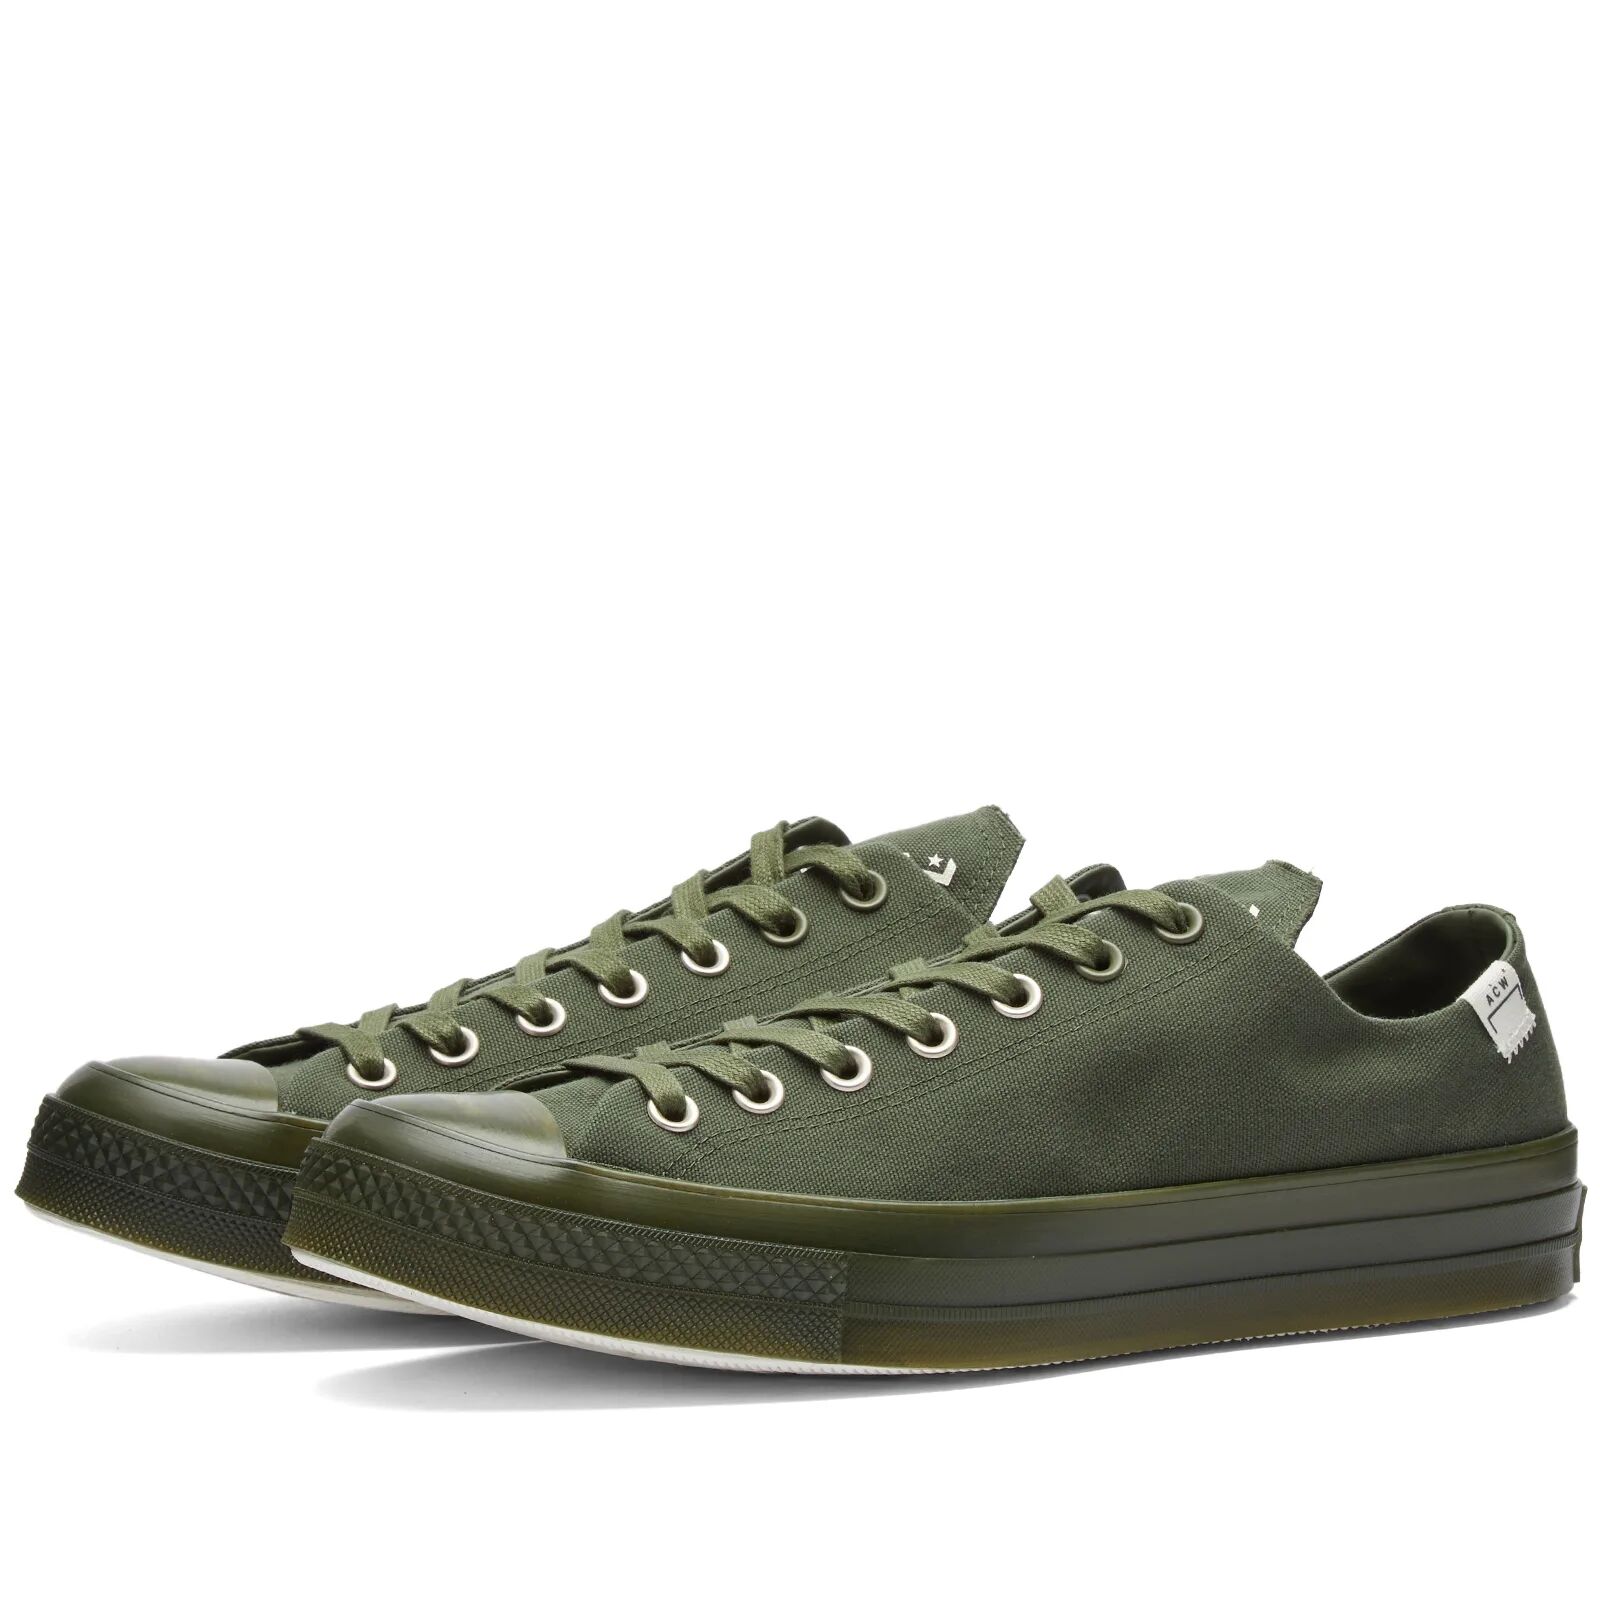 Converse Men's x A-Cold-Wall Chuck Taylor 1970s Ox Sneakers in Rifle Green/Silver Birch, Size UK 7